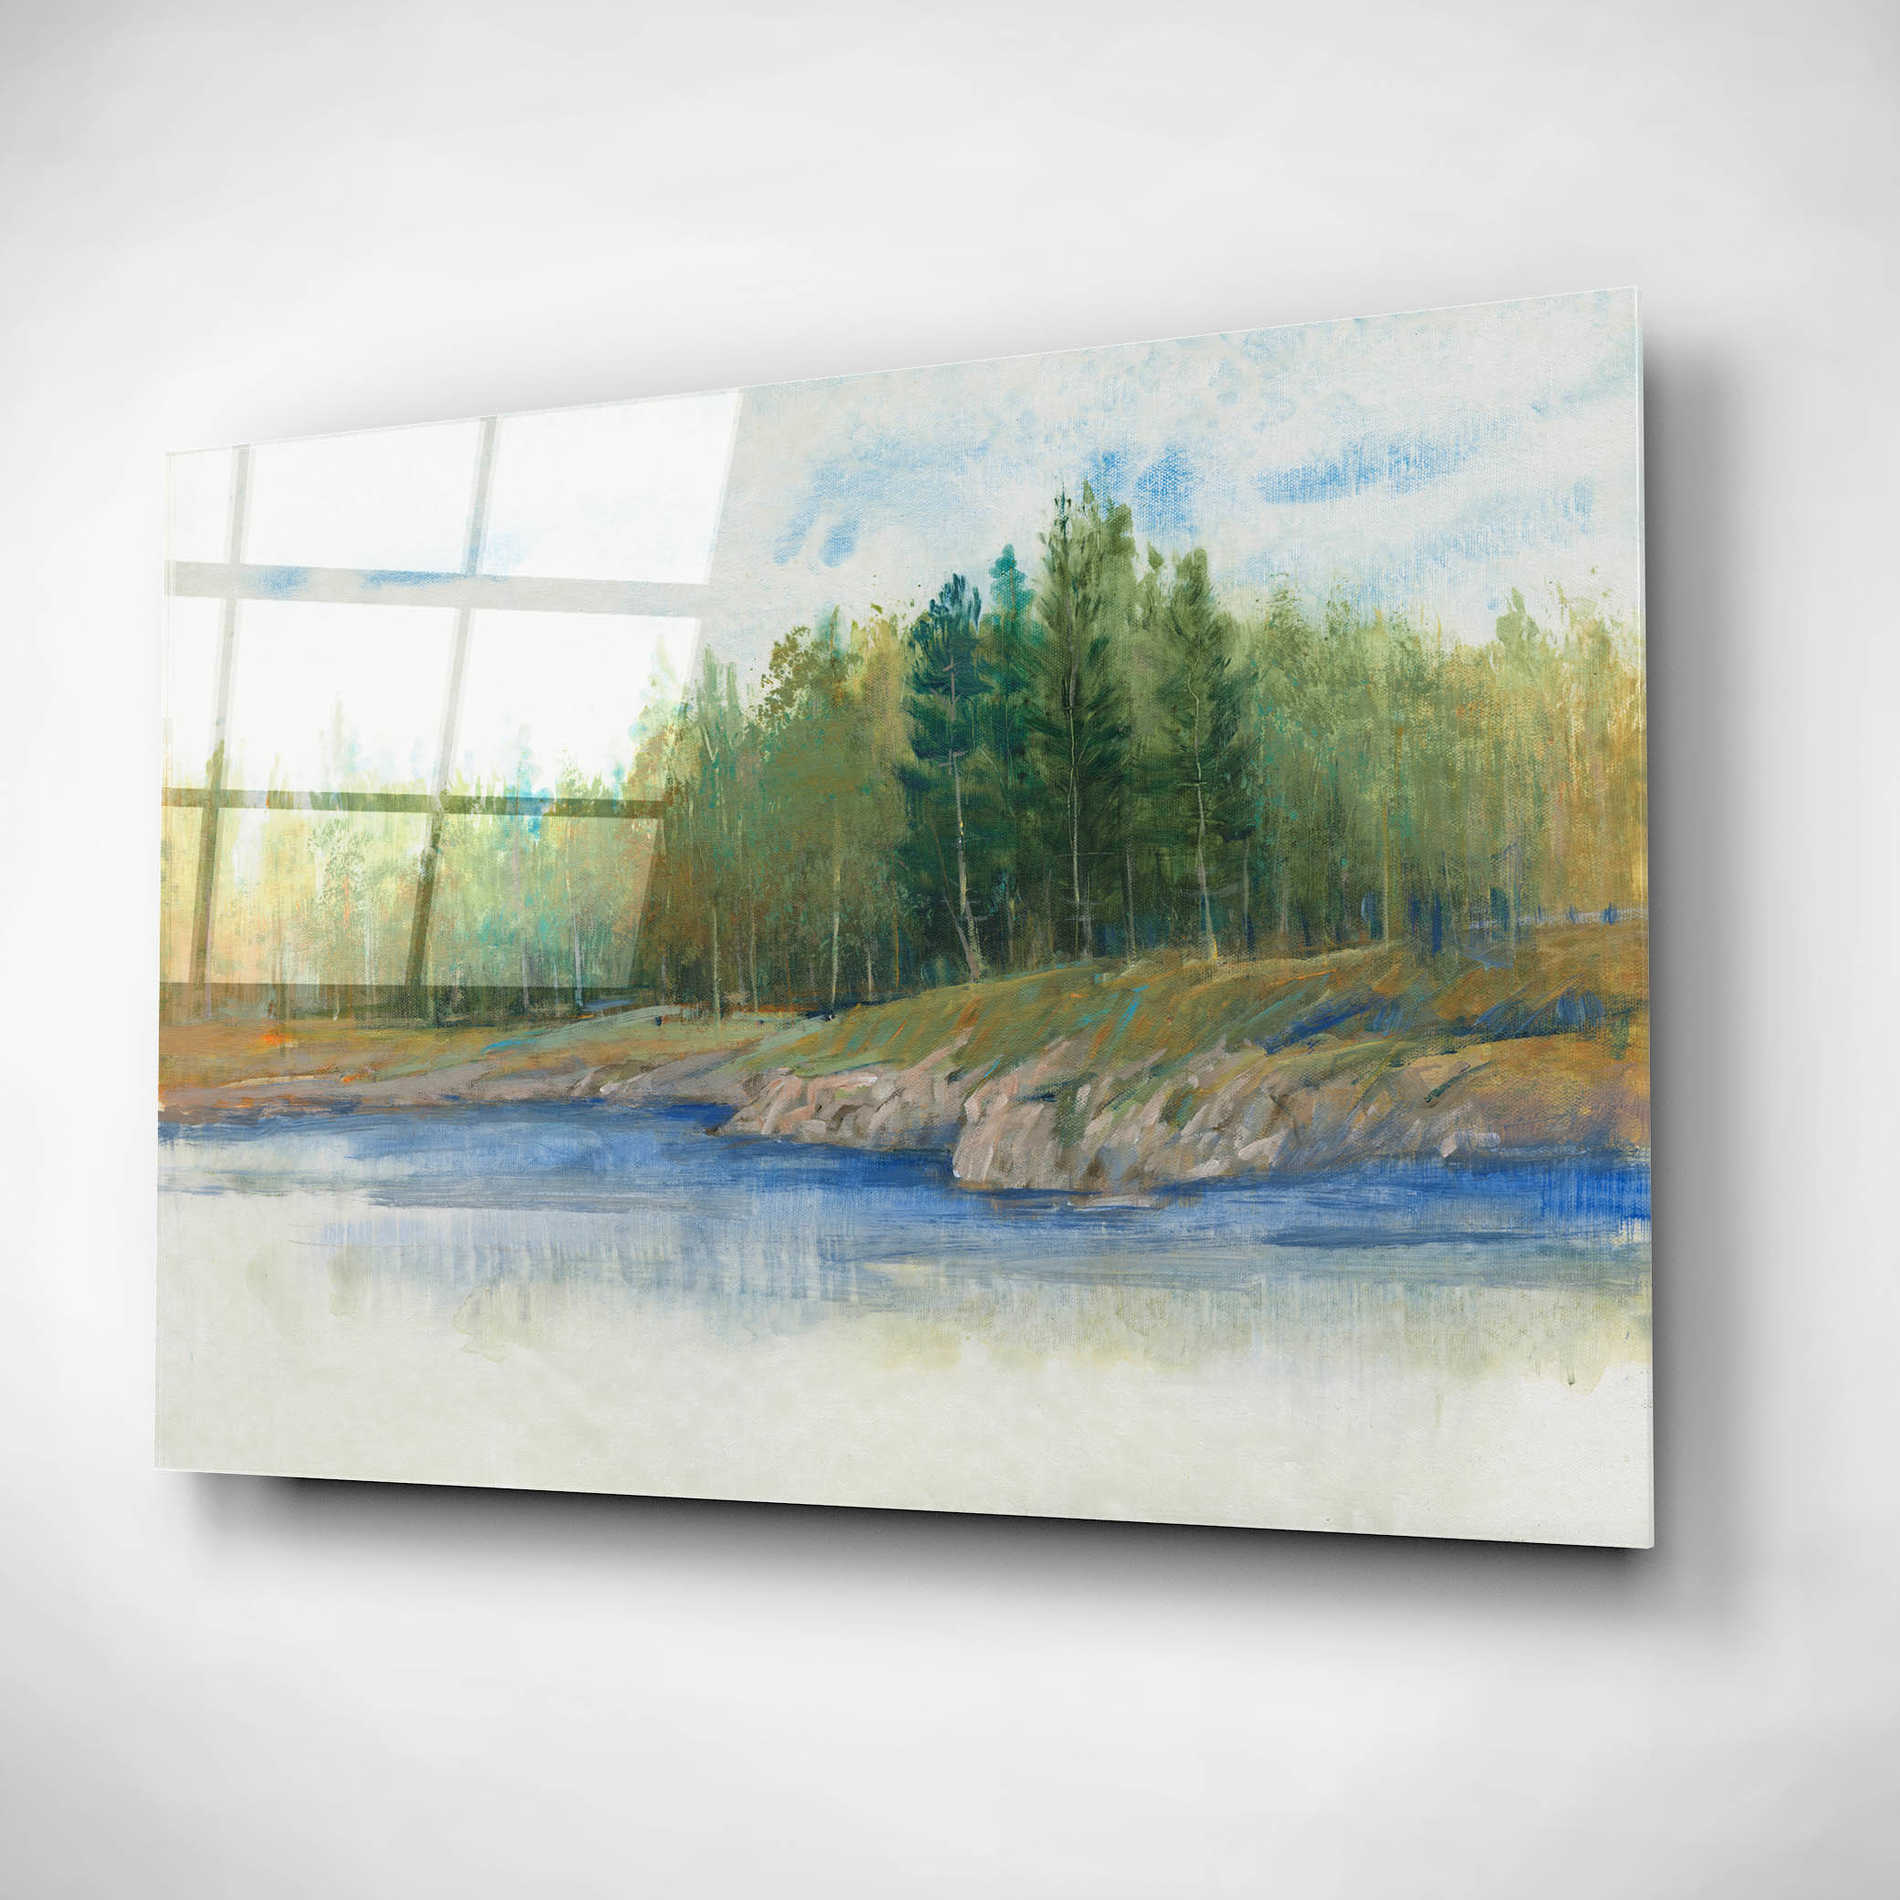 Epic Art 'From the Banks II' by Tim O'Toole, Acrylic Glass Wall Art,16x12